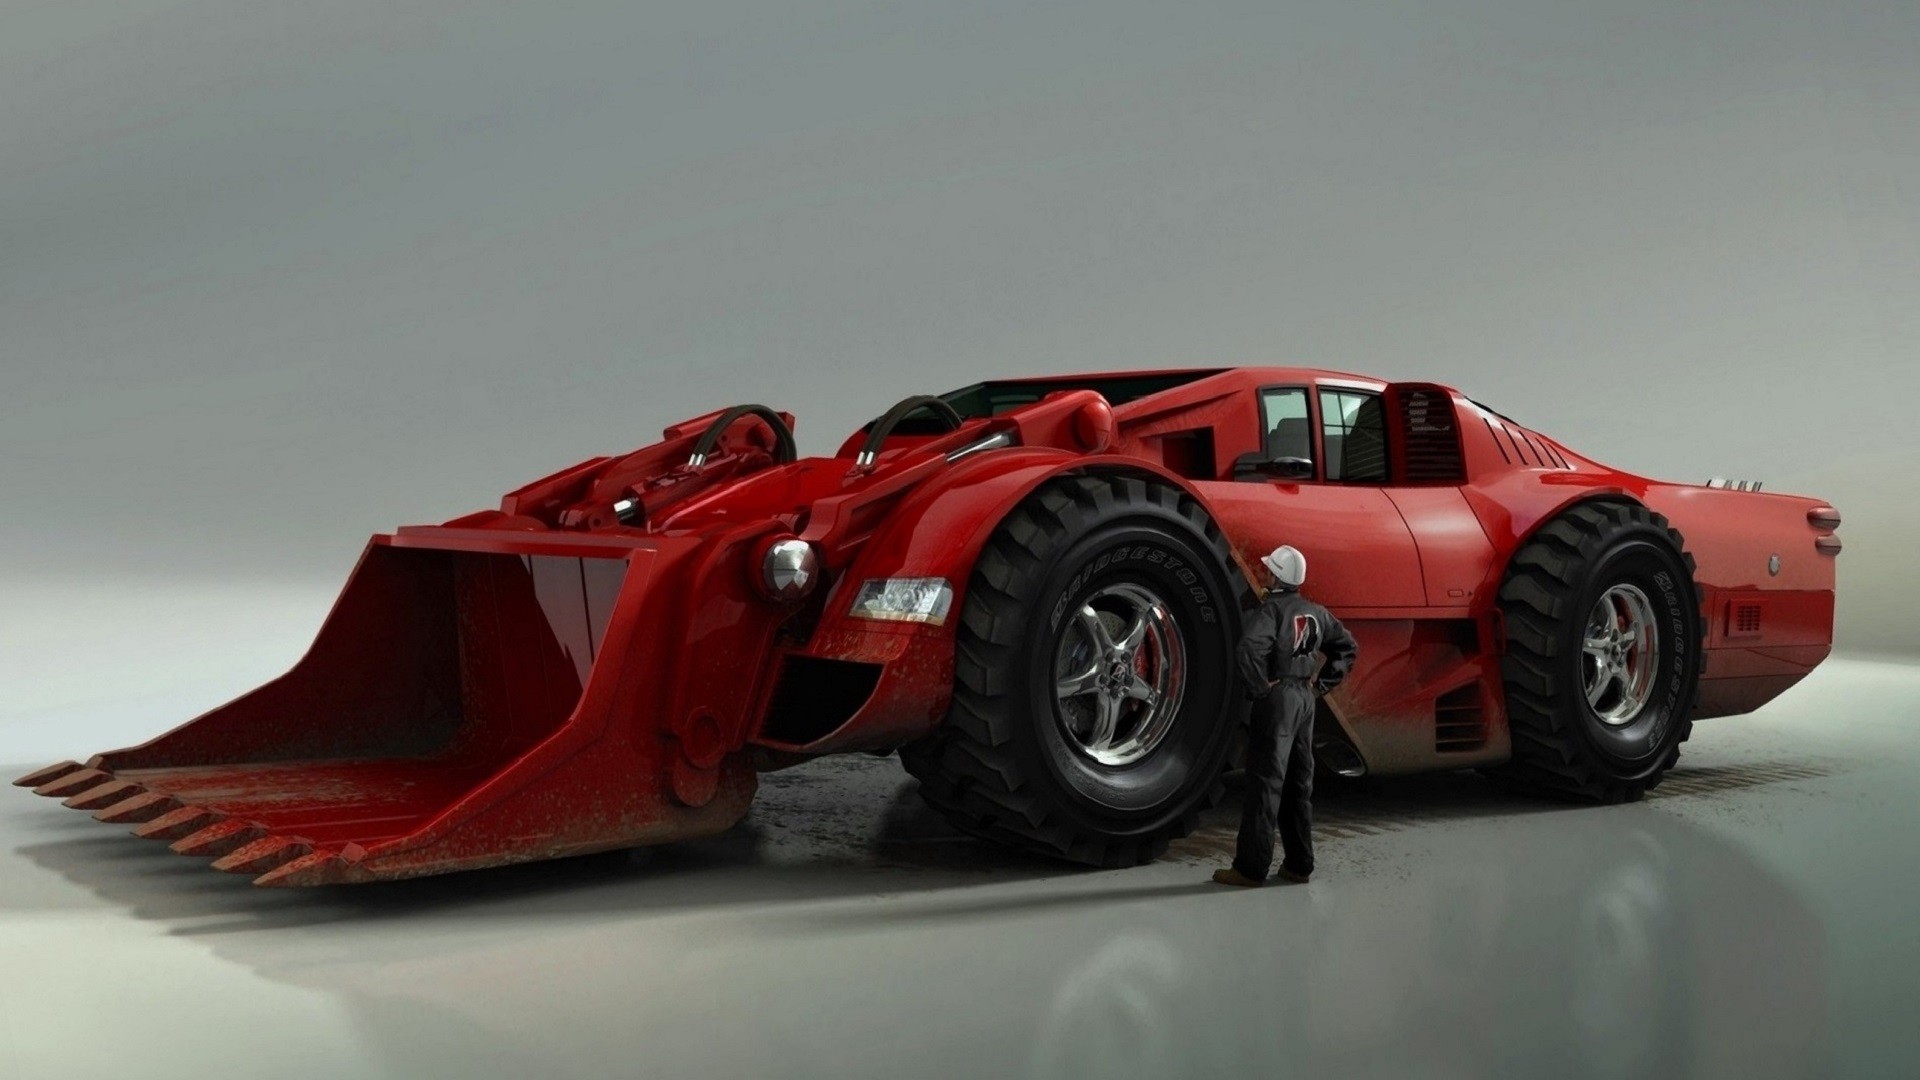 General 1920x1080 concept art digital art vehicle simple background red cars bulldozer gray background men CGI red